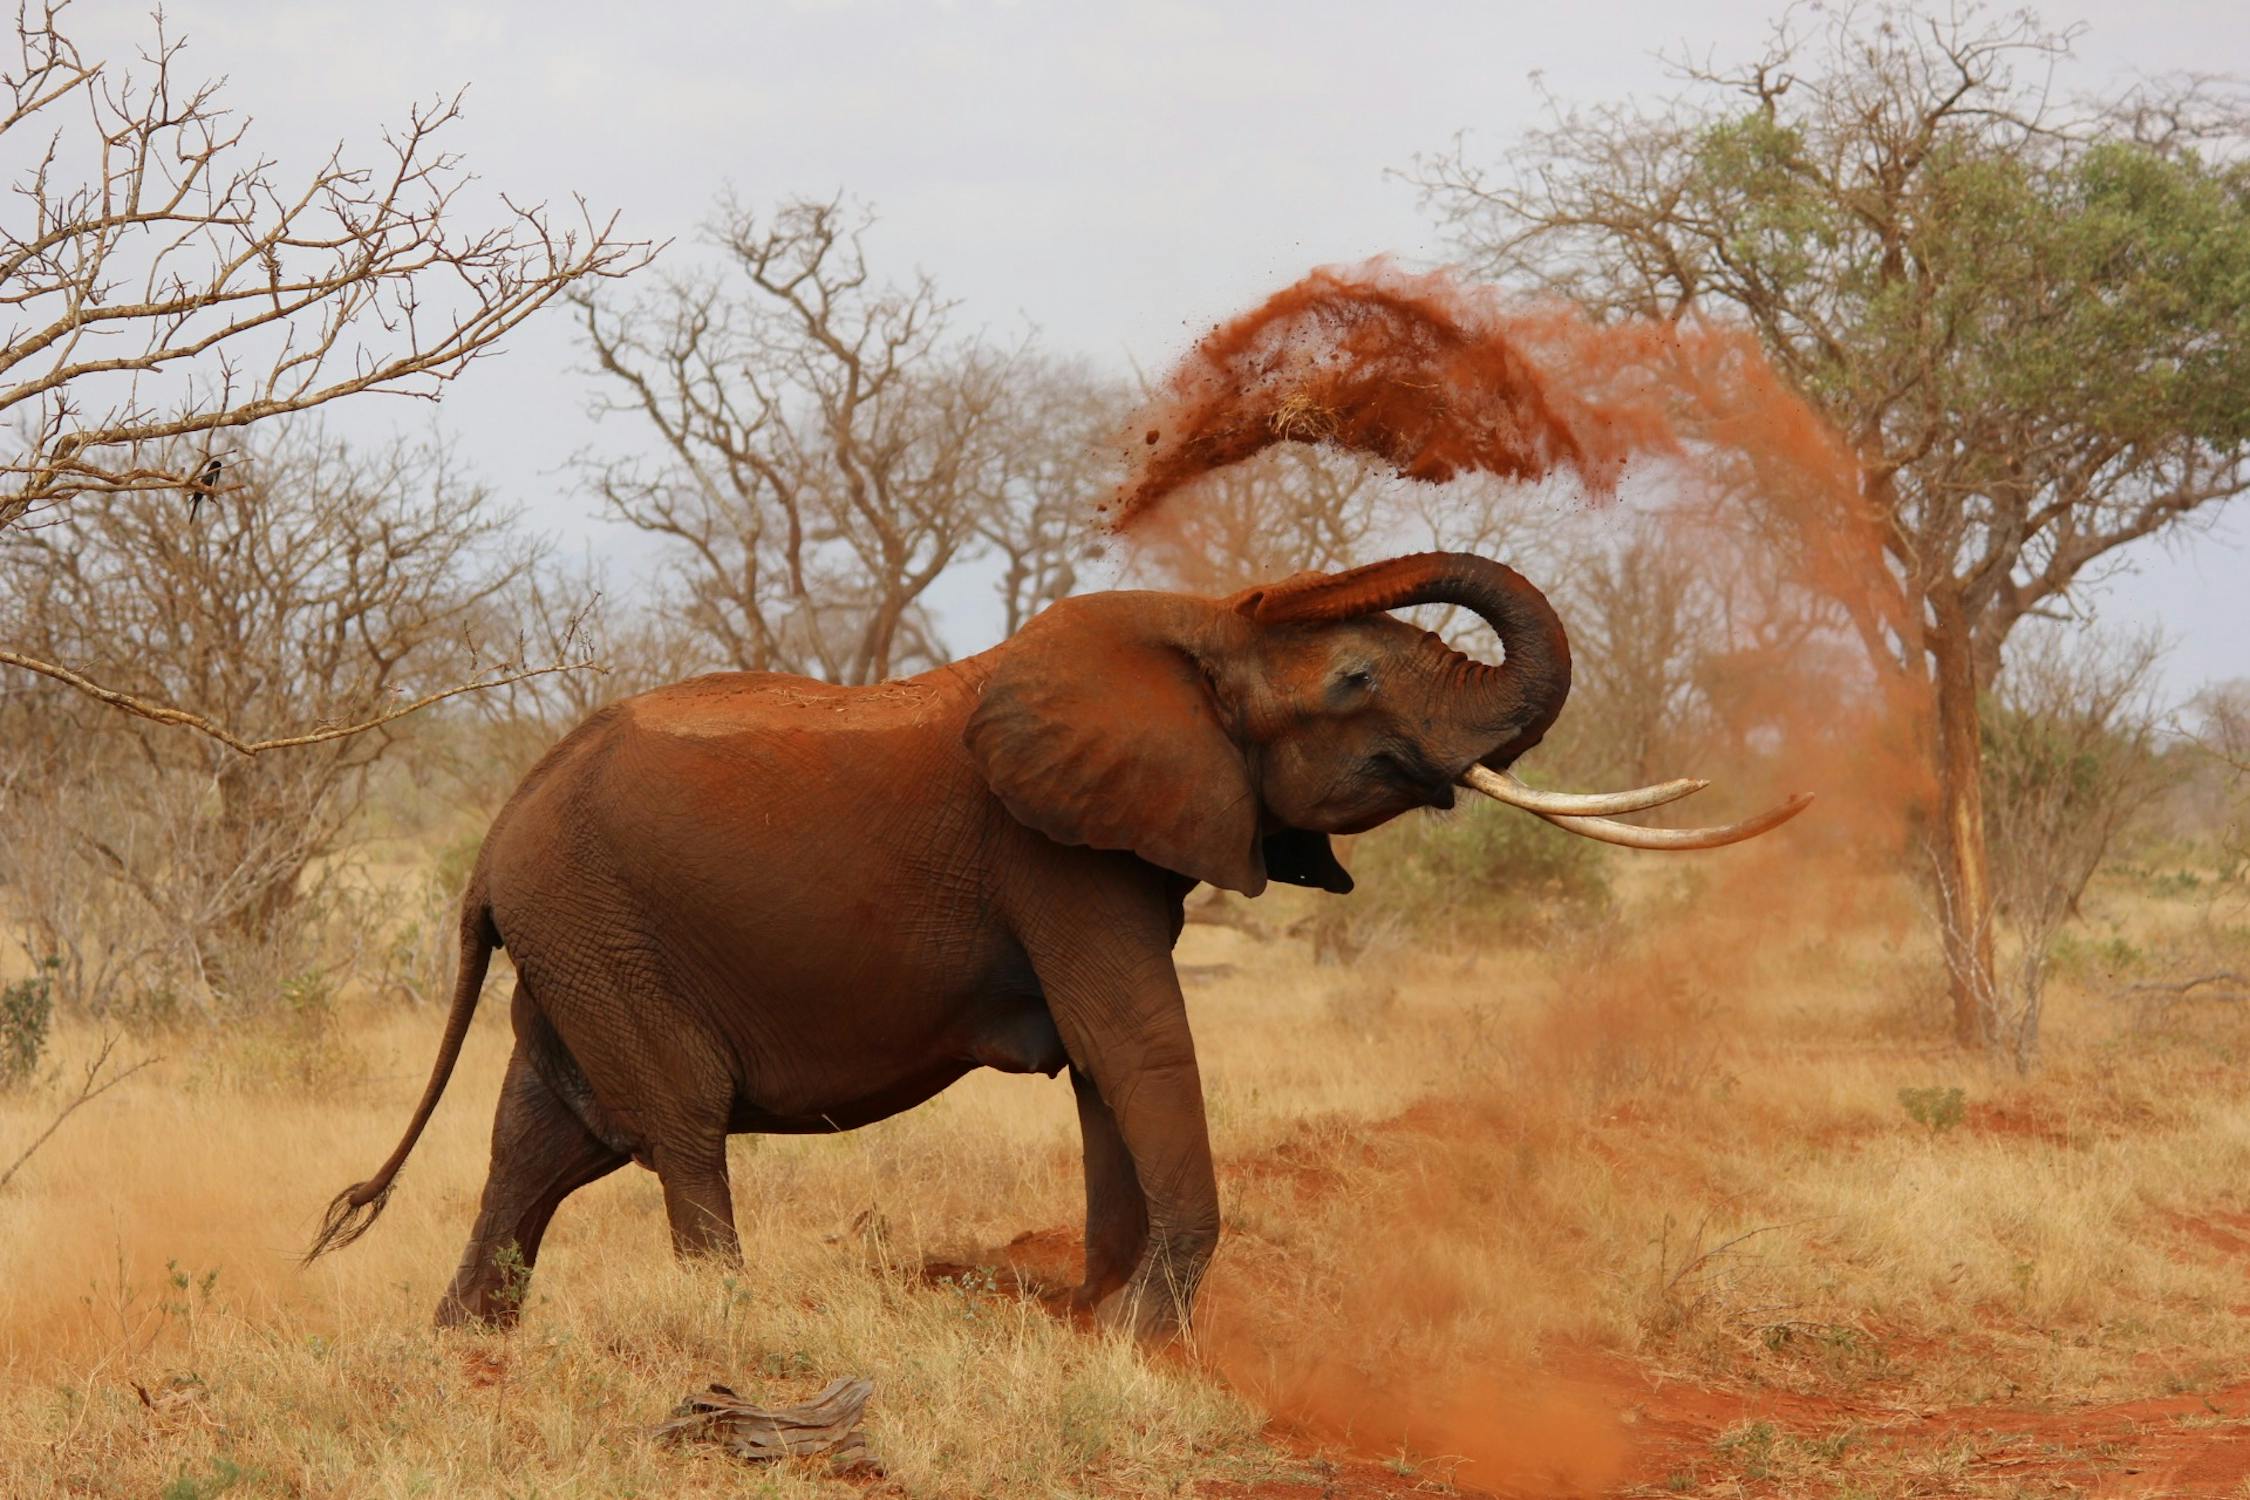 an elephant throwing dirt in the air